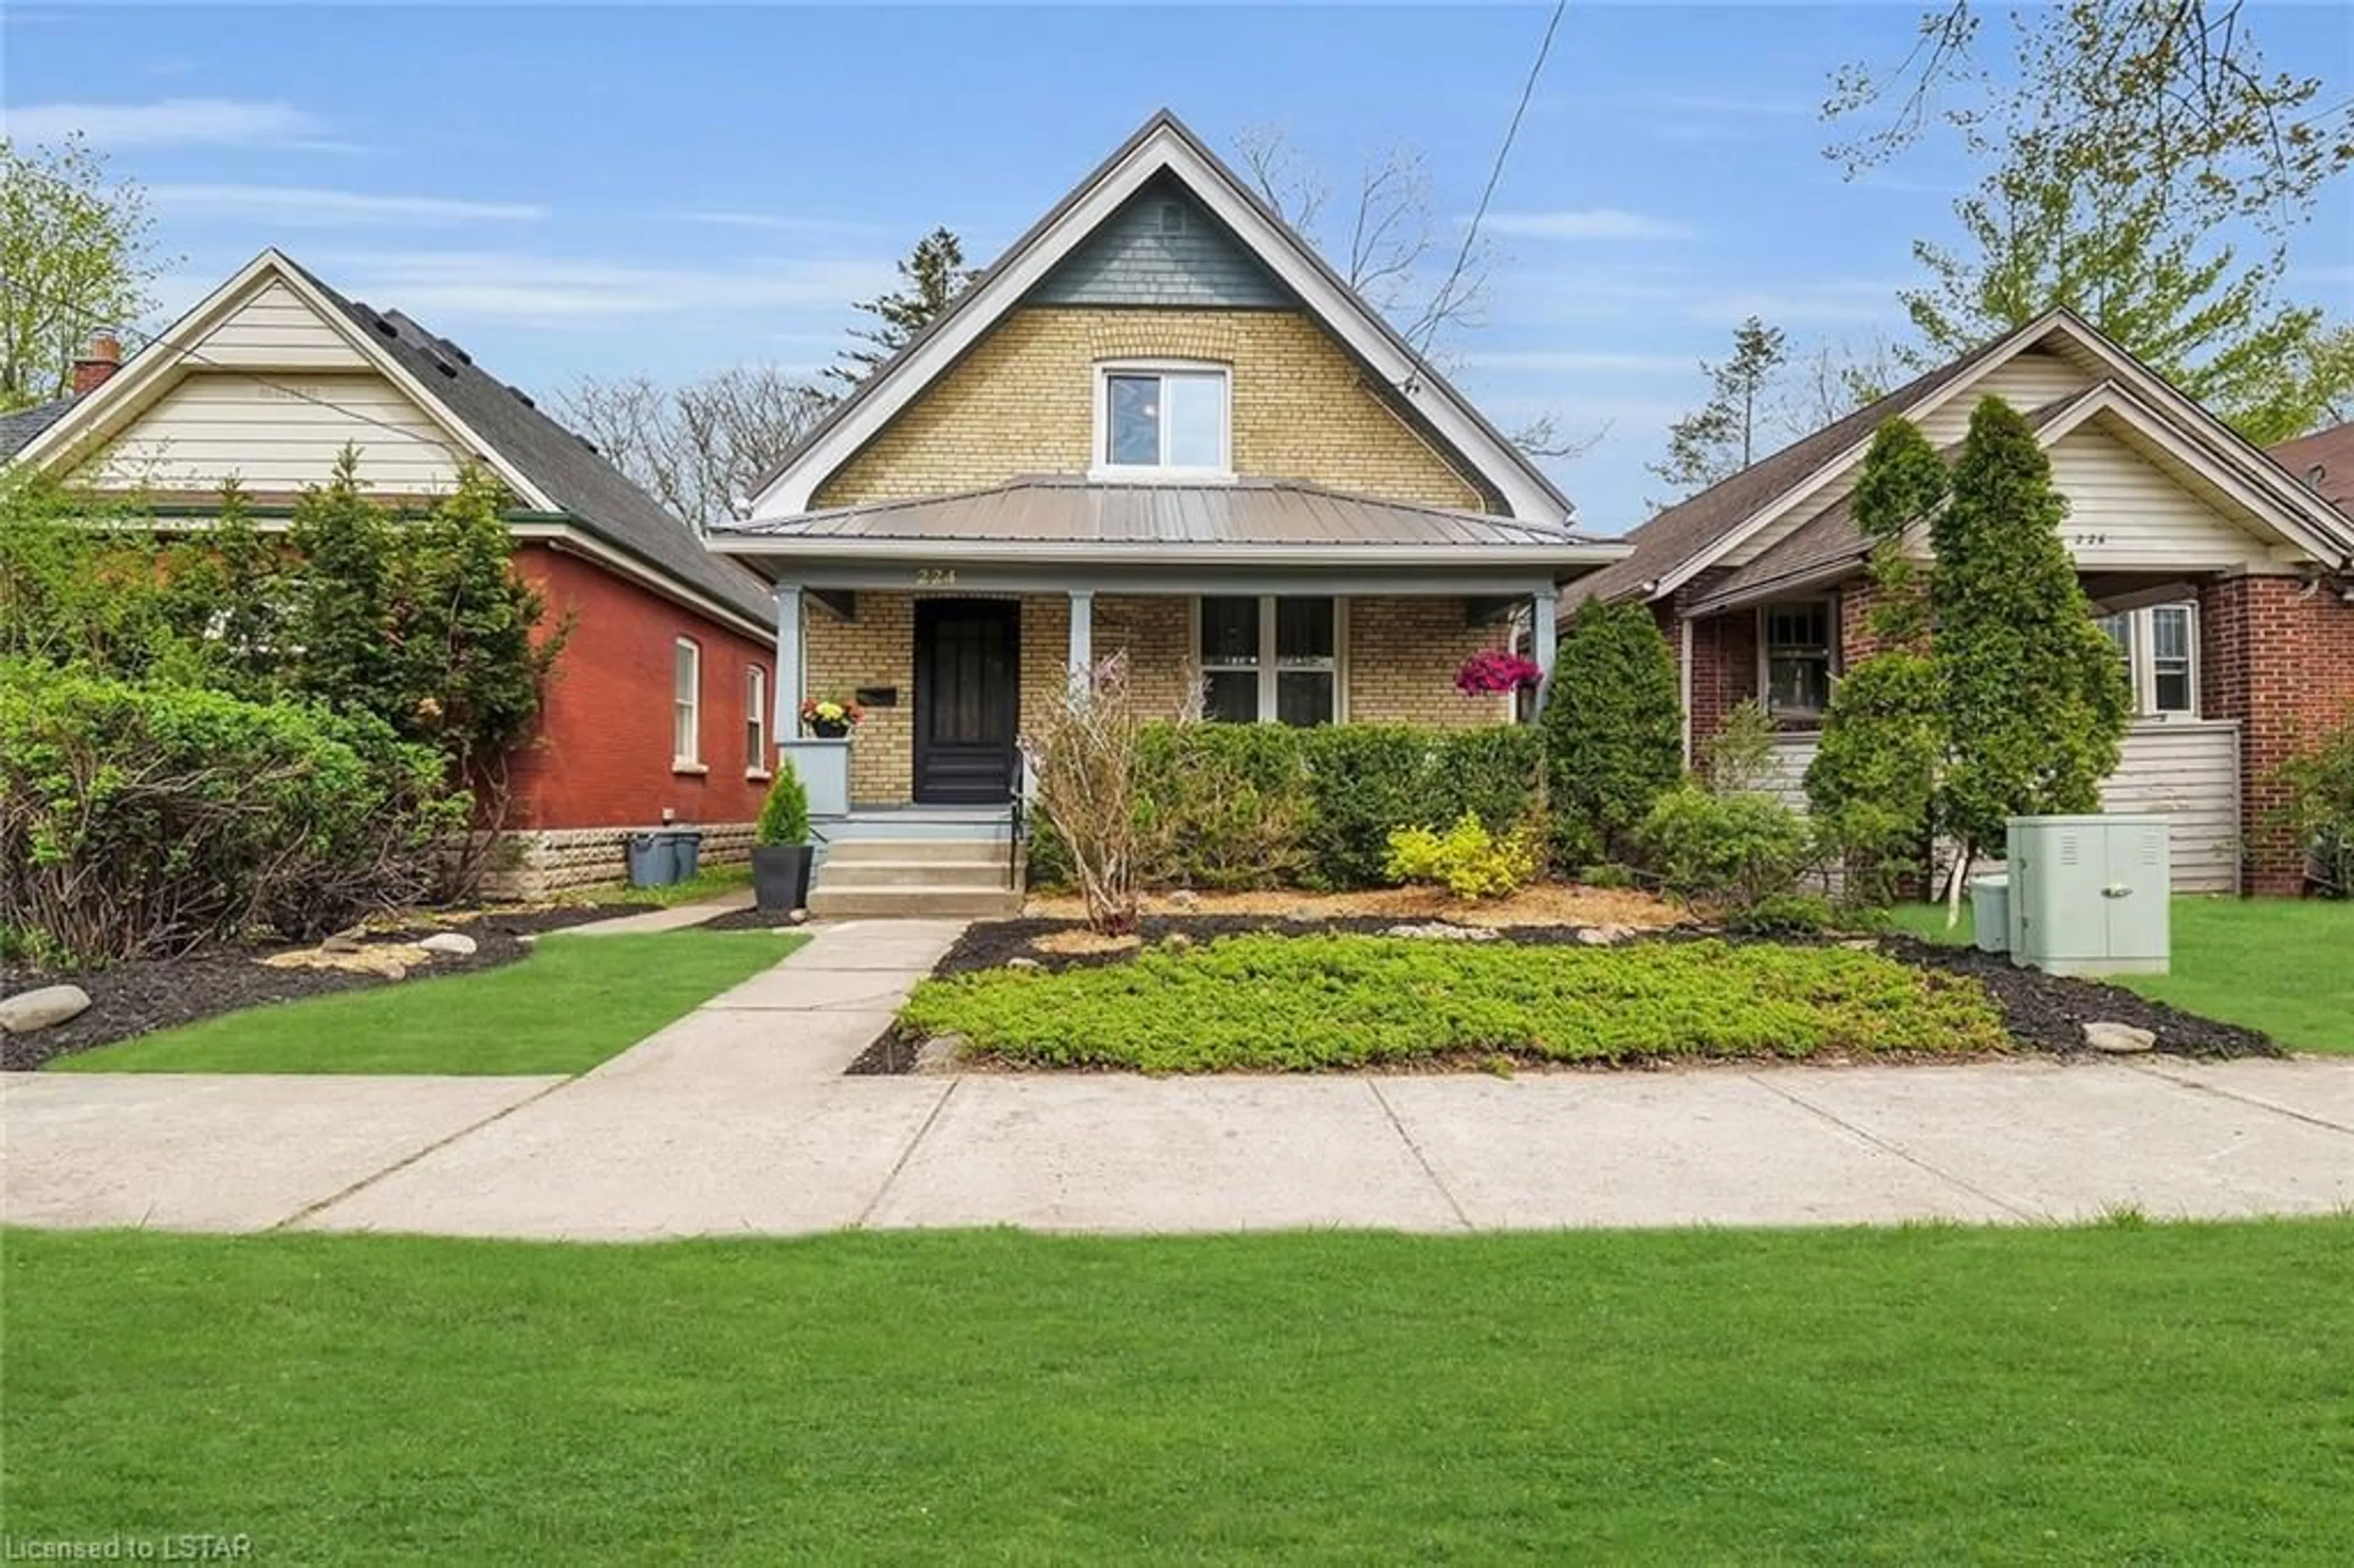 Home with brick exterior material for 224 Raymond Ave, London Ontario N6A 2N1